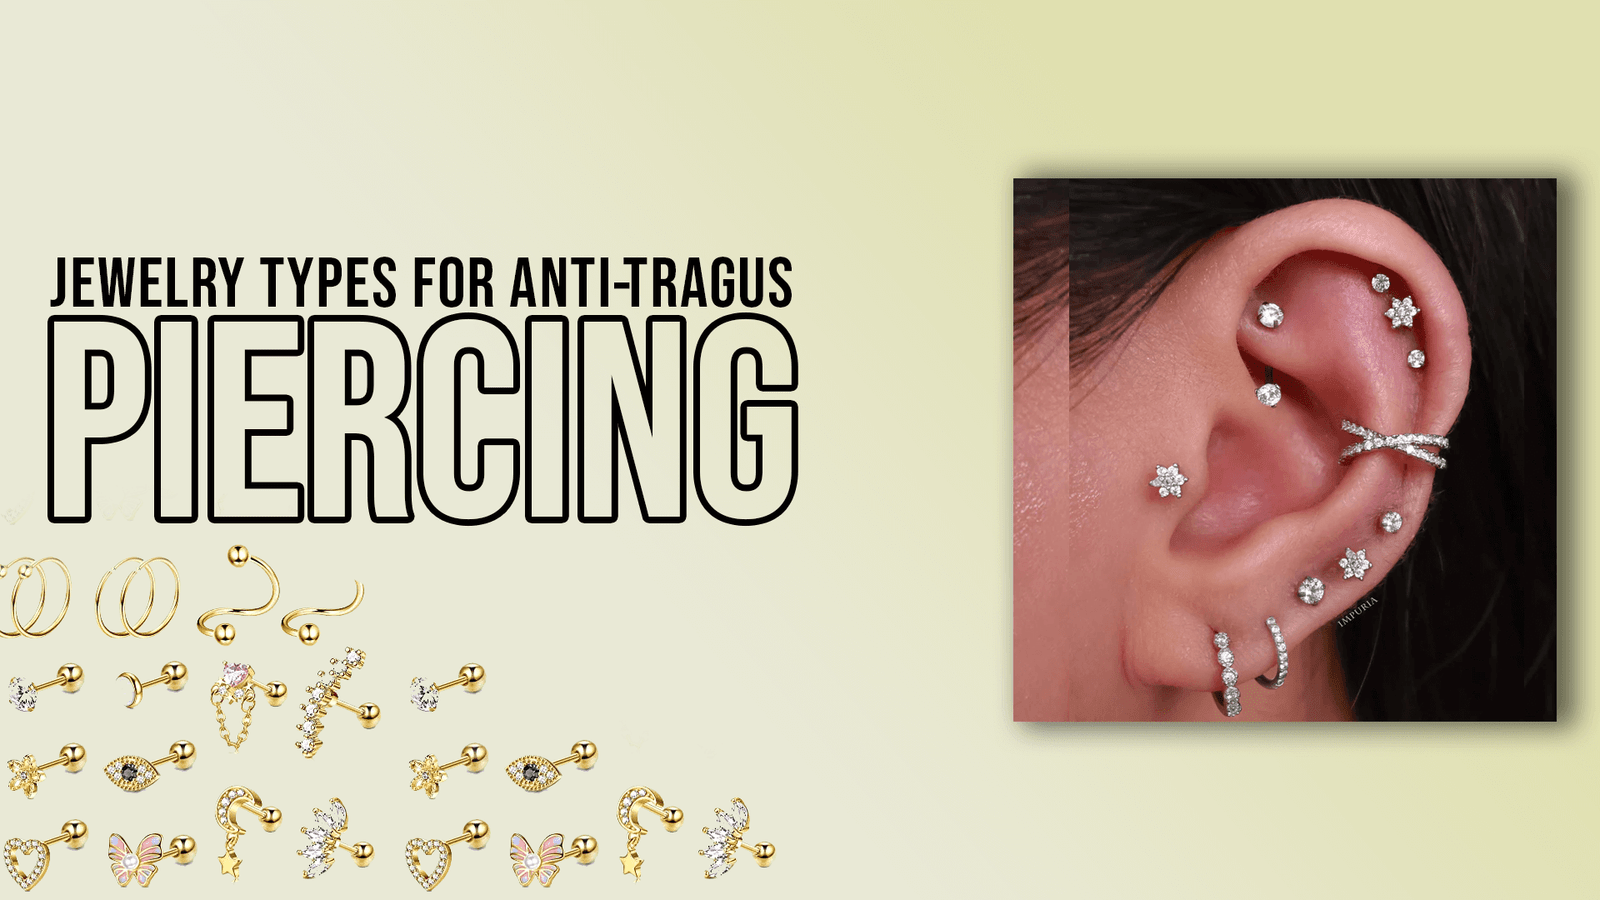 Jewelry Types for Anti-Tragus Piercing